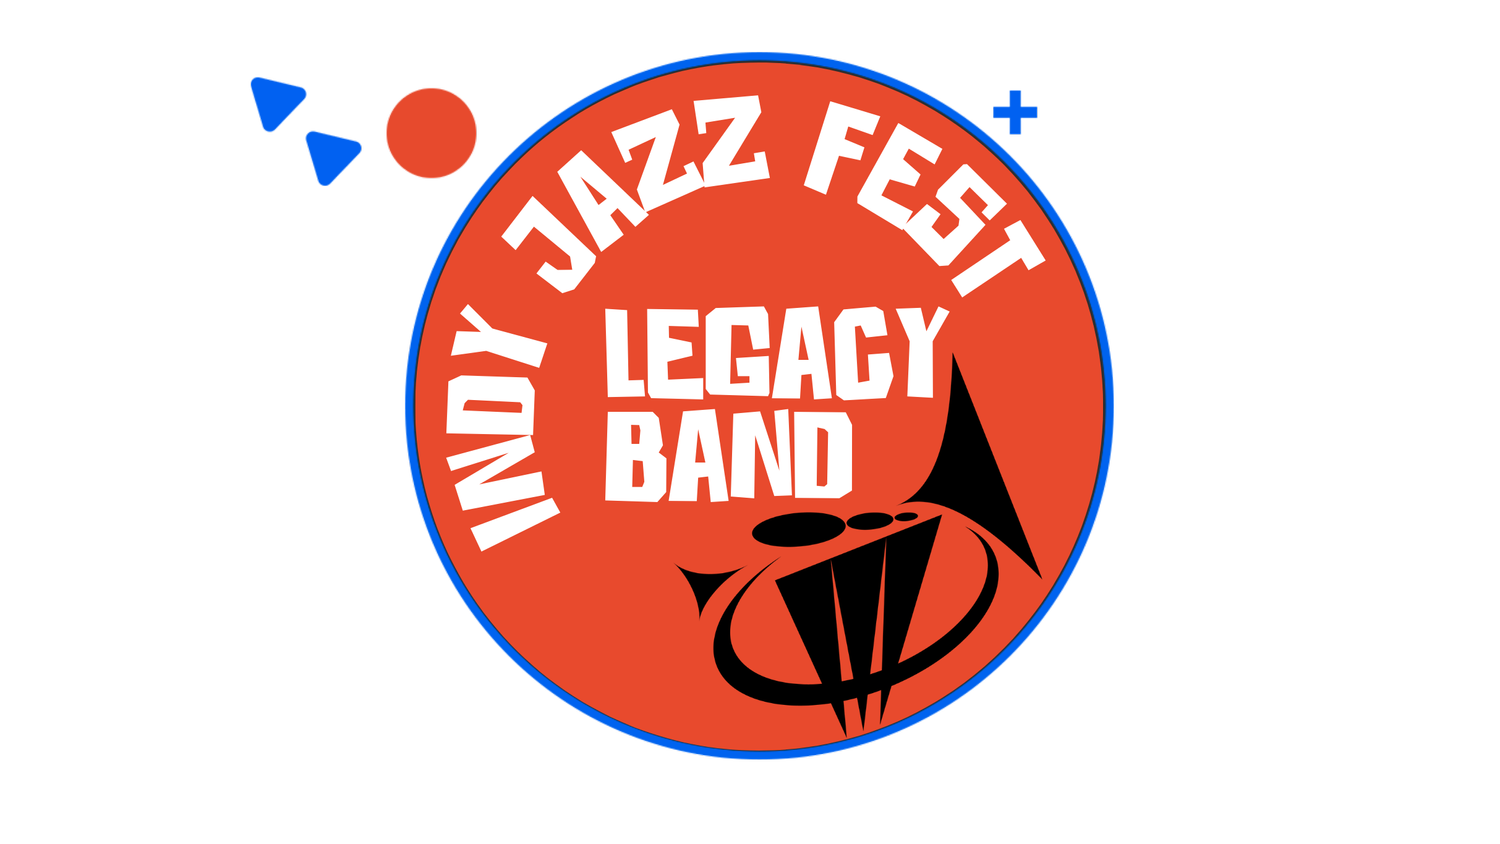 indy+jazz+fest+legacy+band (1).png